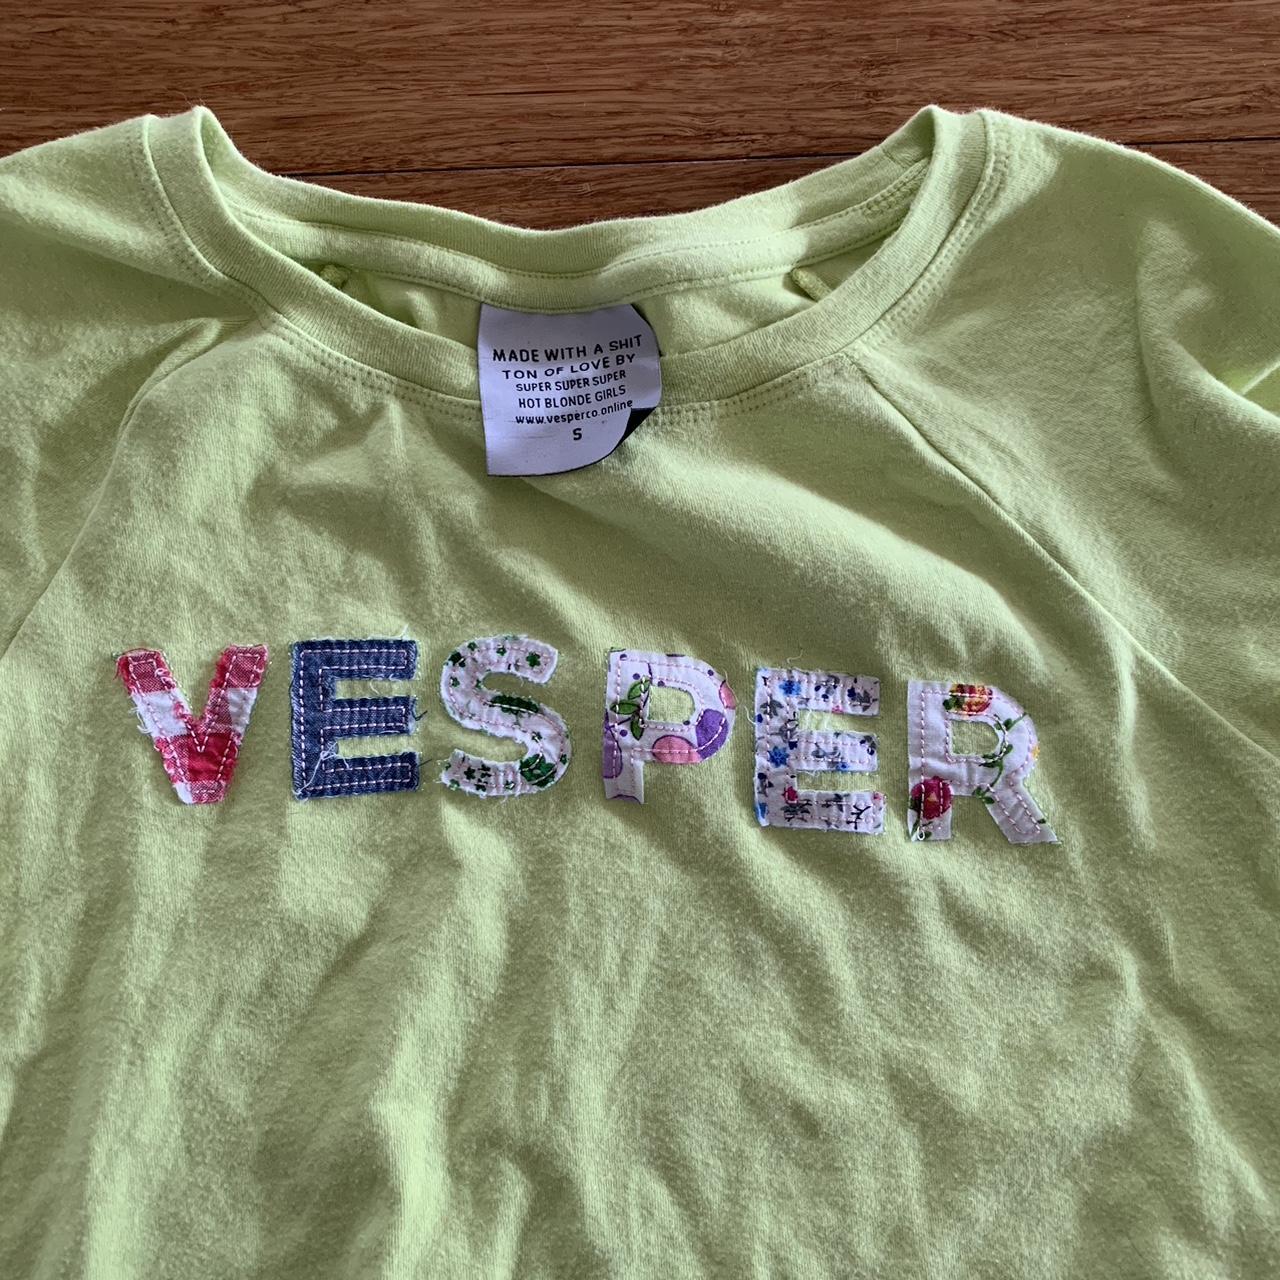 Vesper Co lime baby tee in size small In excellent... - Depop